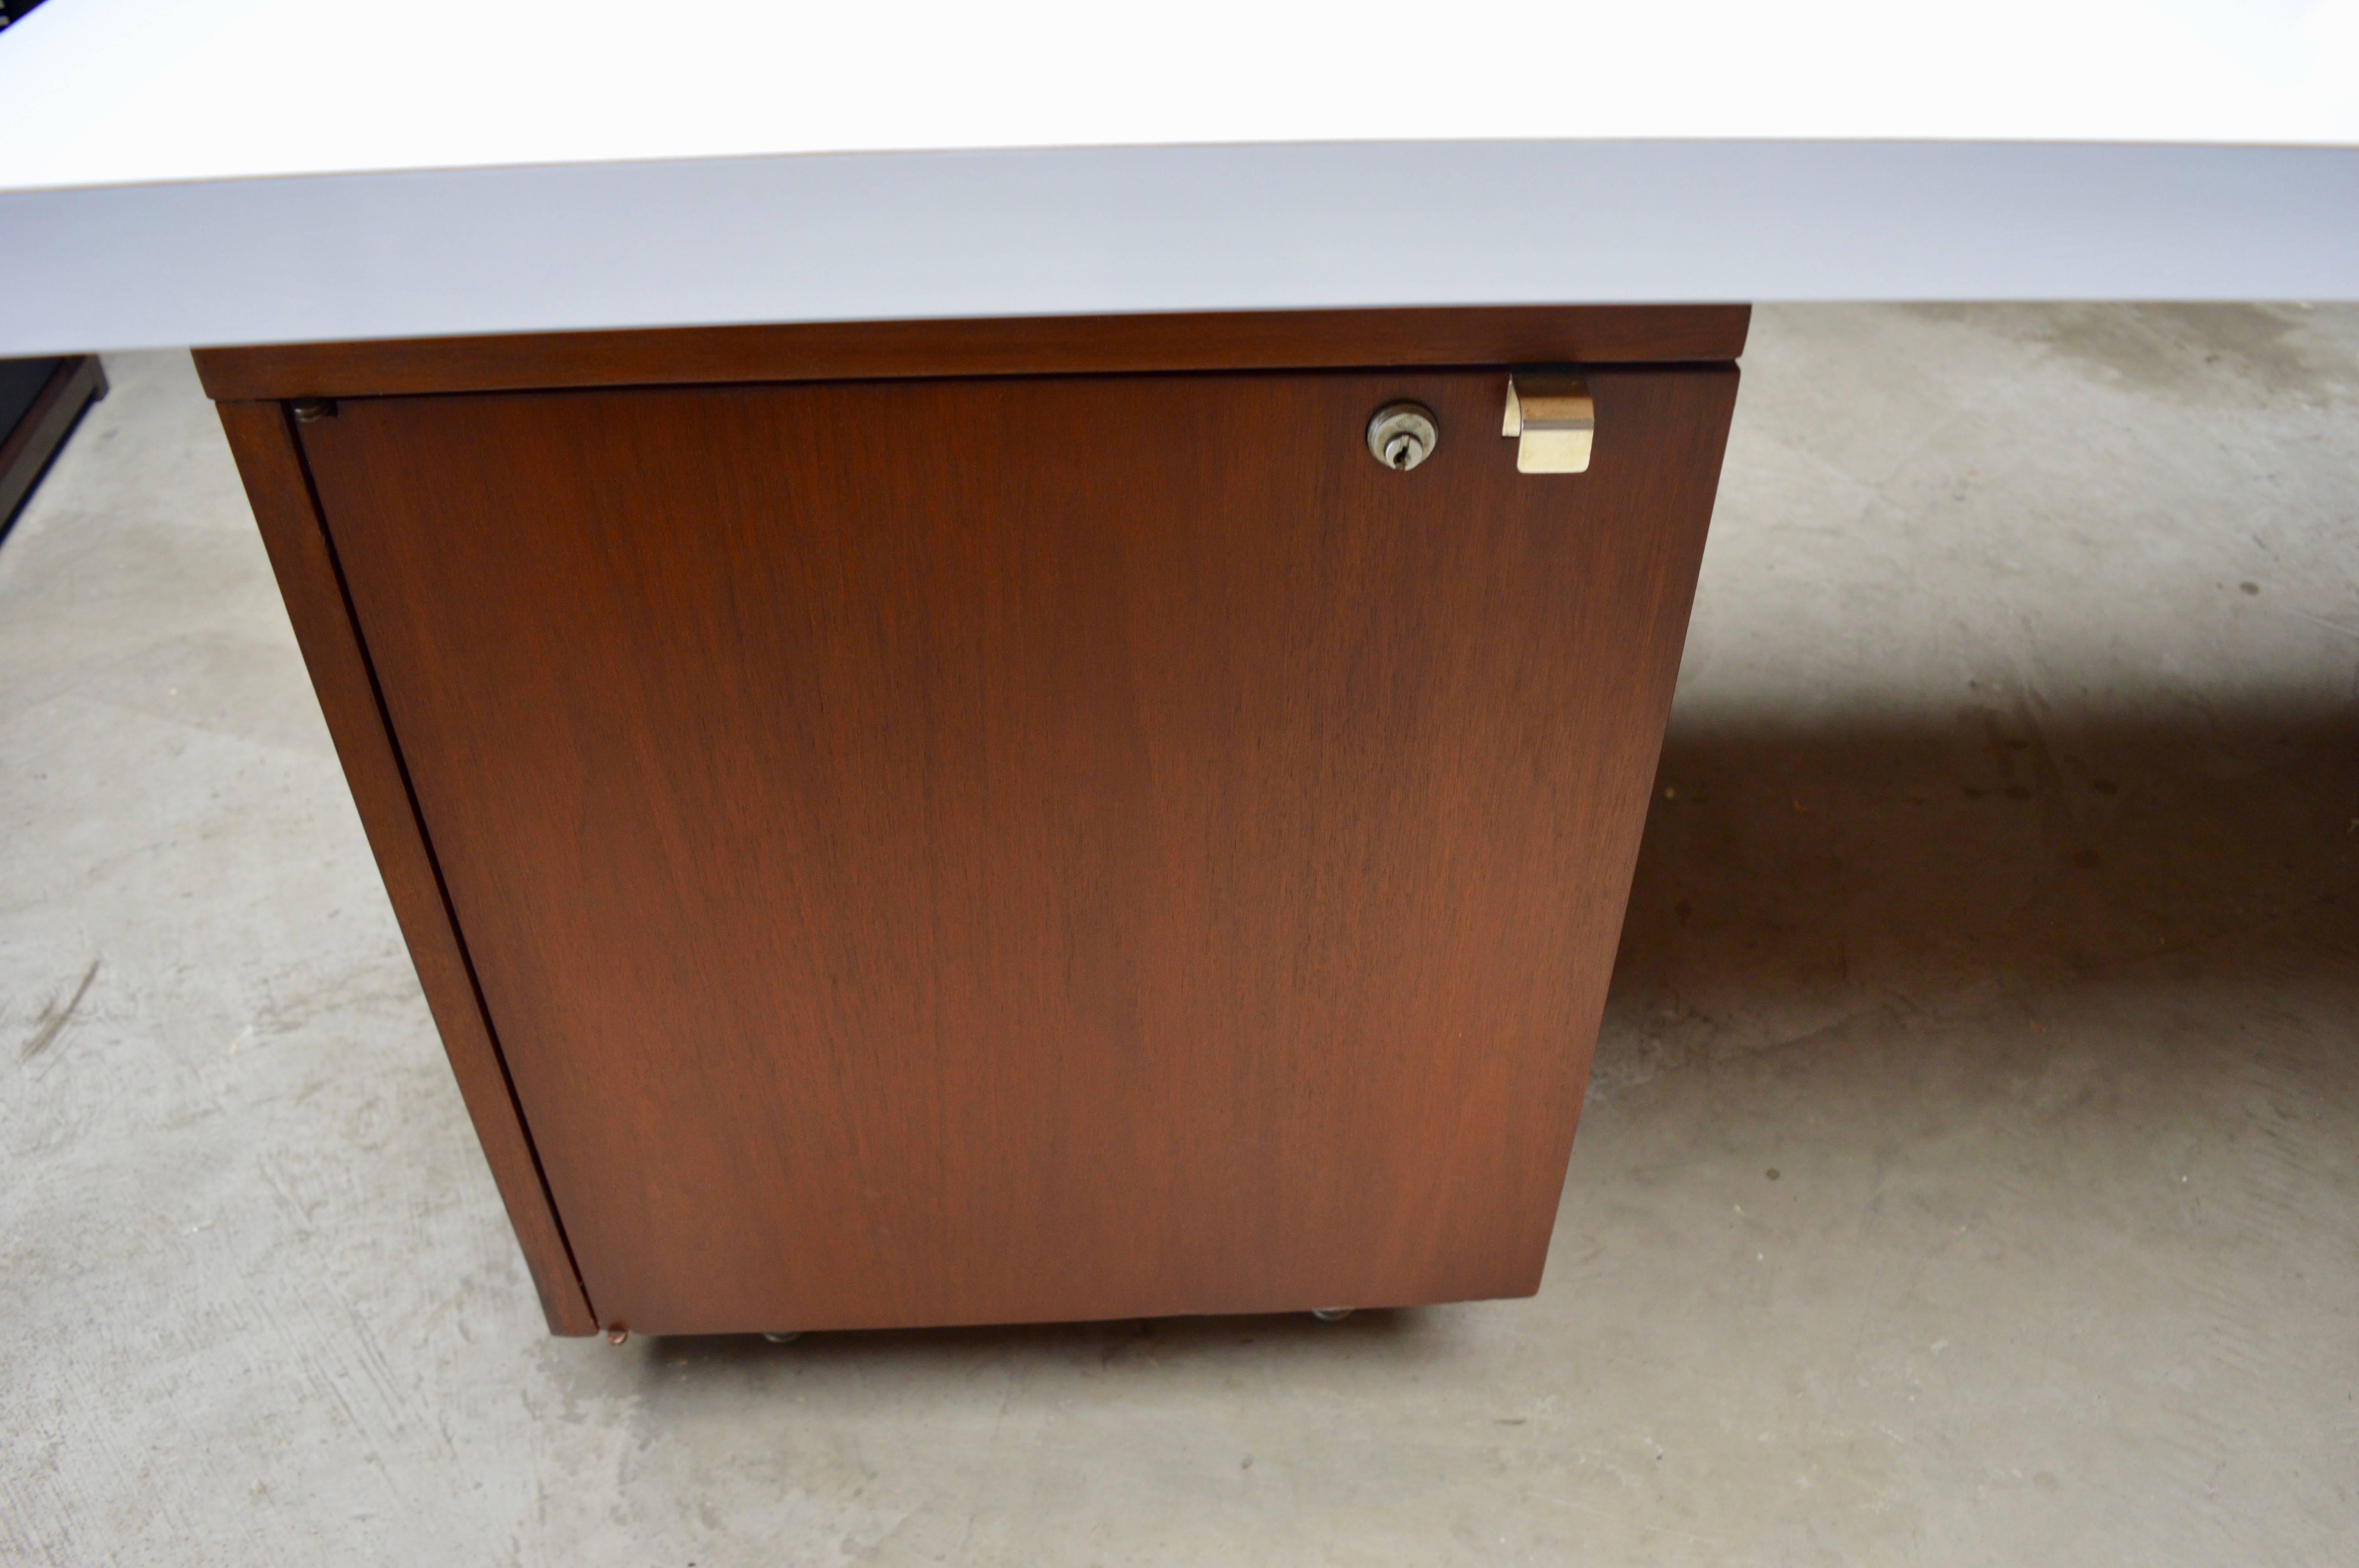 Fantastic desk by George Nelson for Herman Miller. Newly laminated Formica top with dry erase laminate. Very cool, dry/erase surface for your work desk. Extremely functional and unique feature. Walnut desk with chrome hardware. Two drawer pedestal